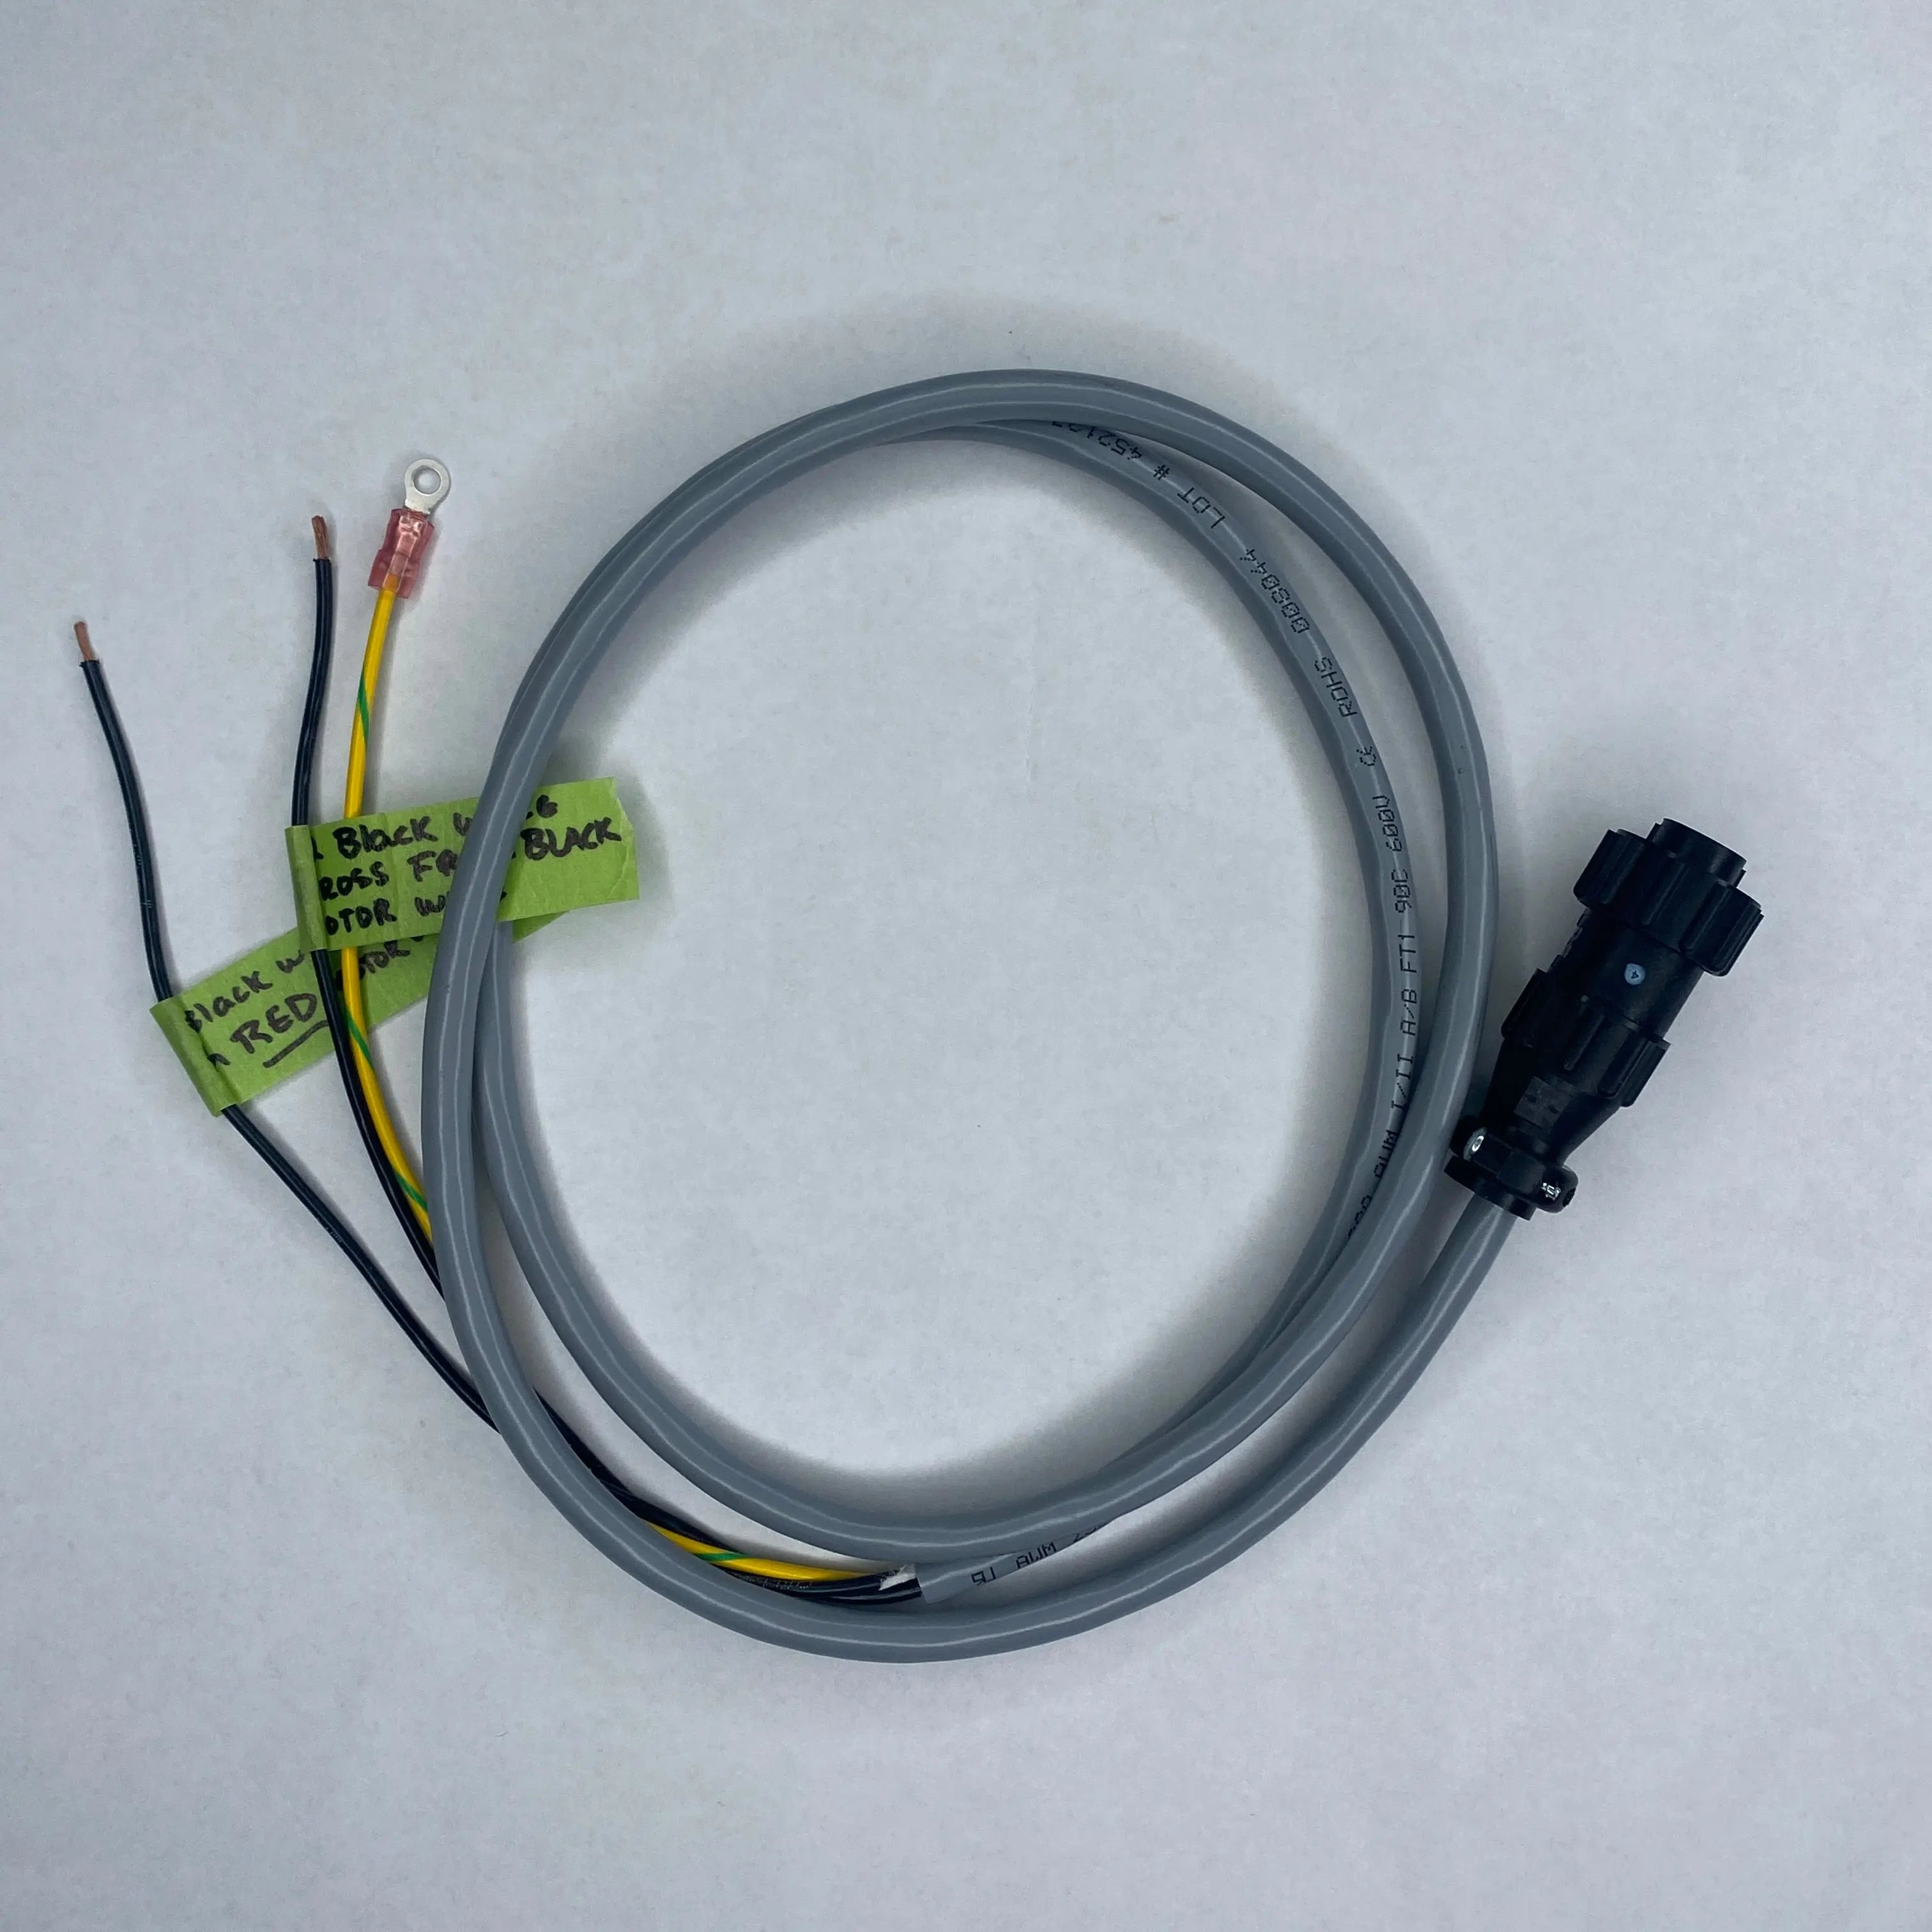 Y Power Cable for MOD G with Breeze Track